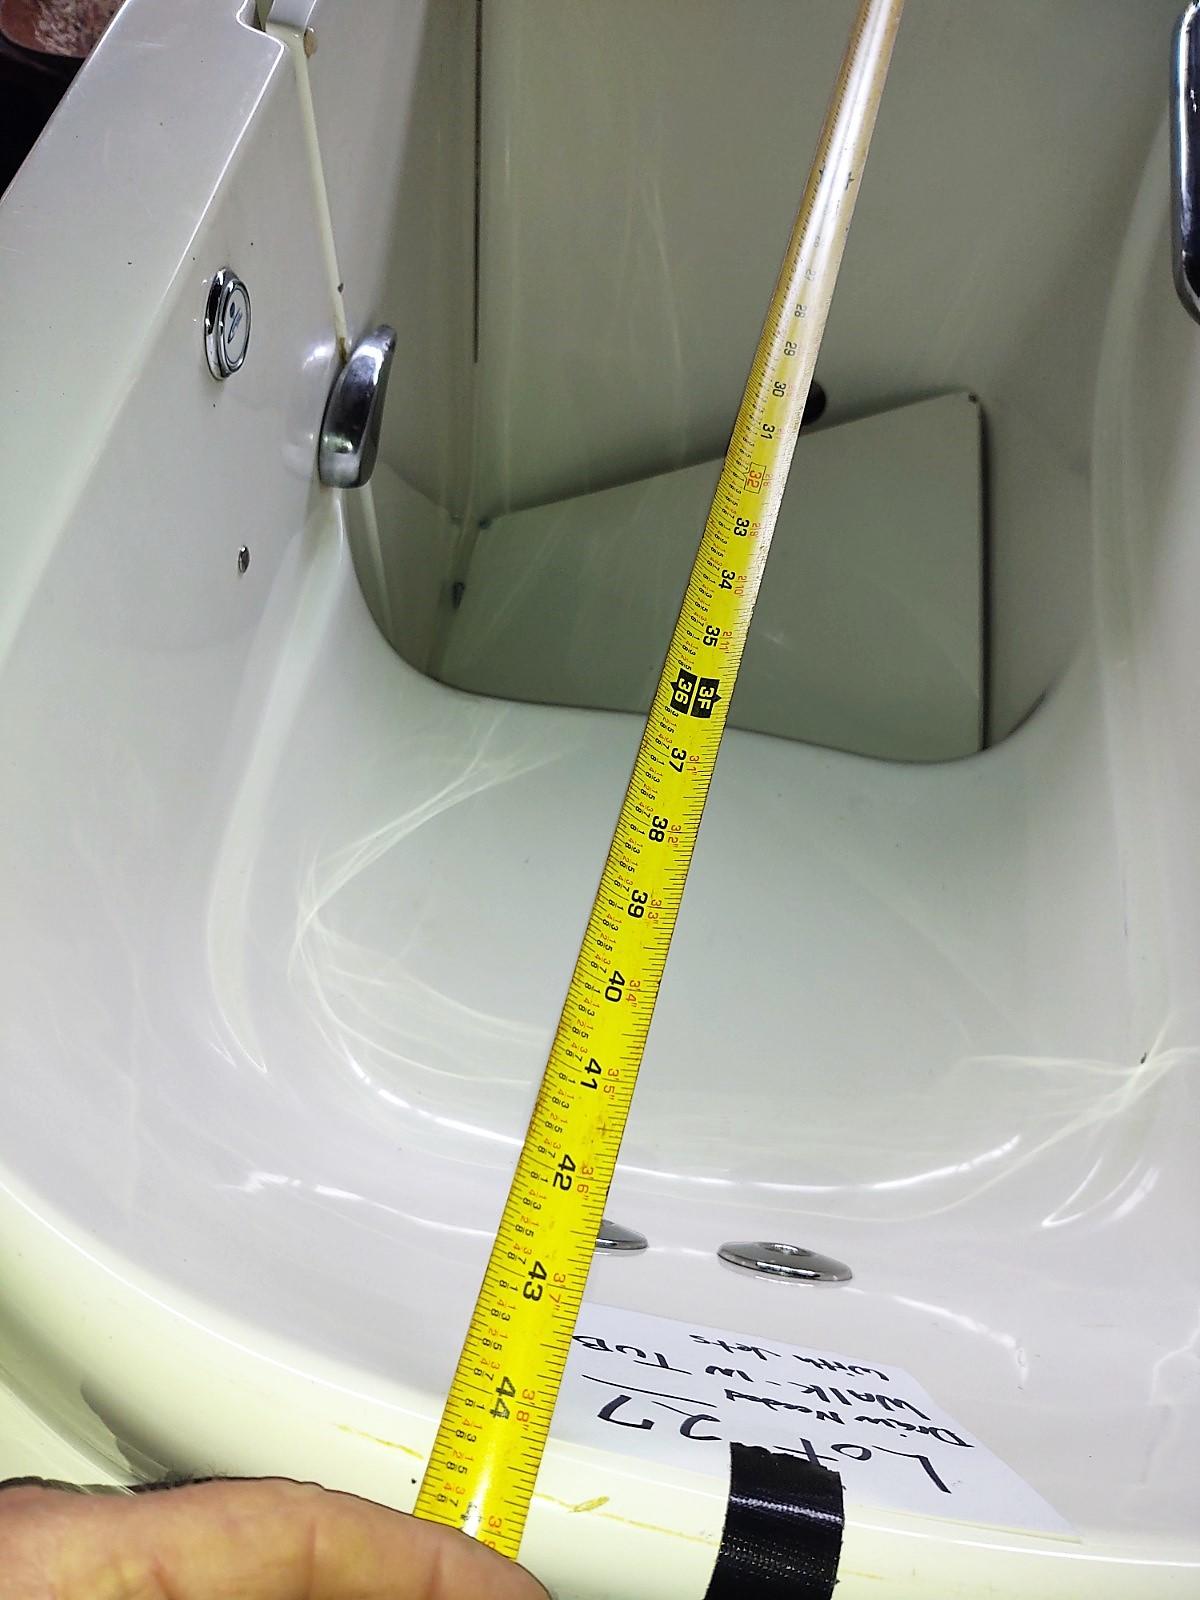 SMALL WHIRLPOOL WALK IN TUB WITH JETS - NEEDS DRAIN - PICK UP ONLY